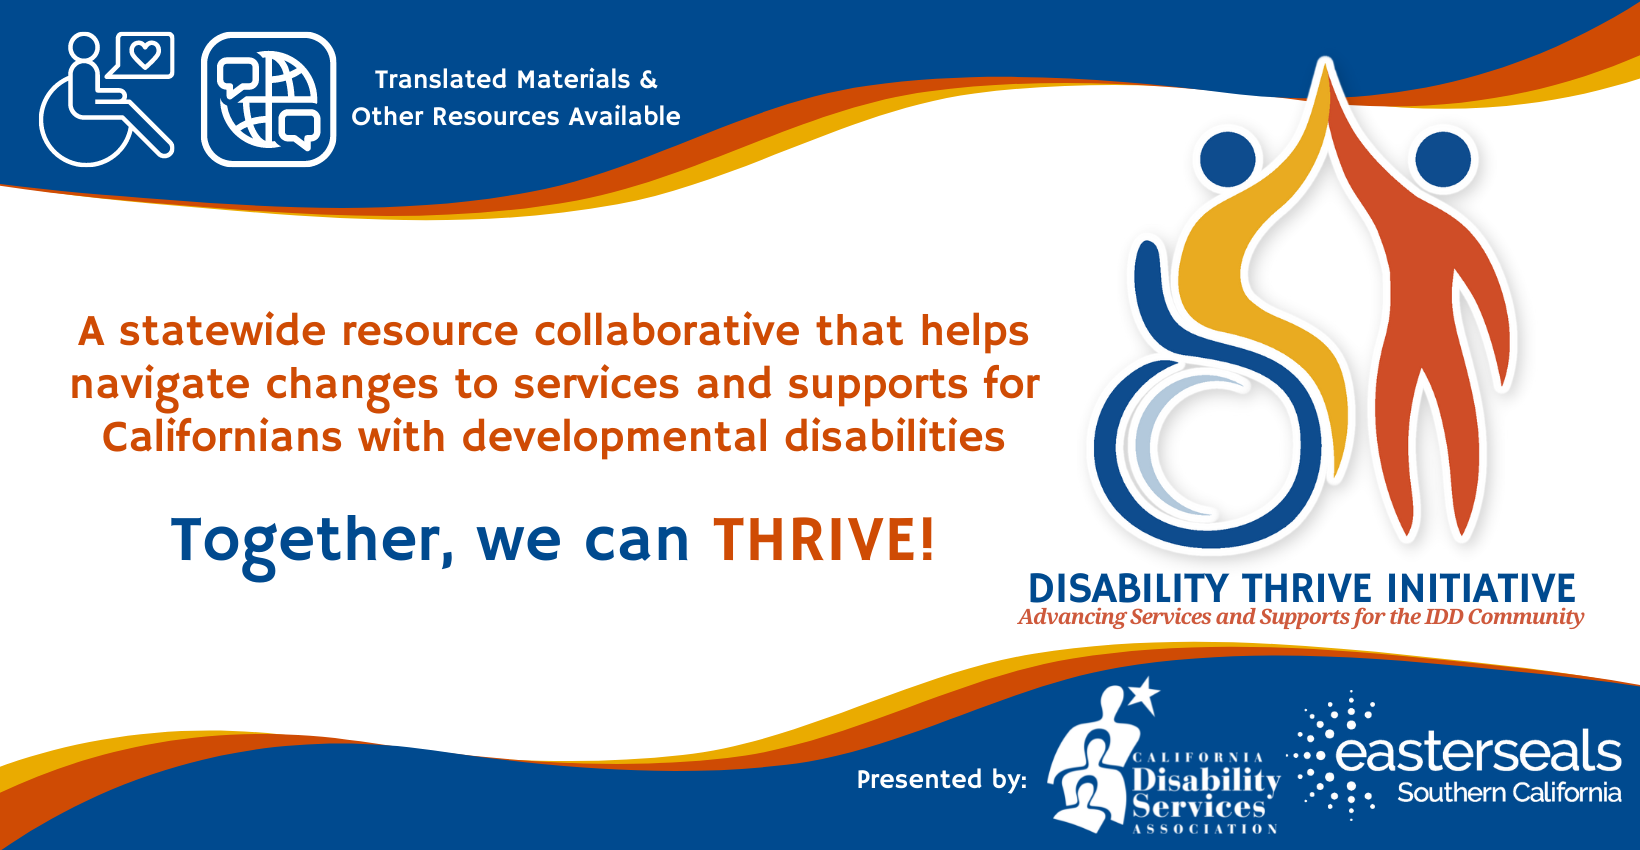 Disability Thrive Banner - Together, we can thrive.